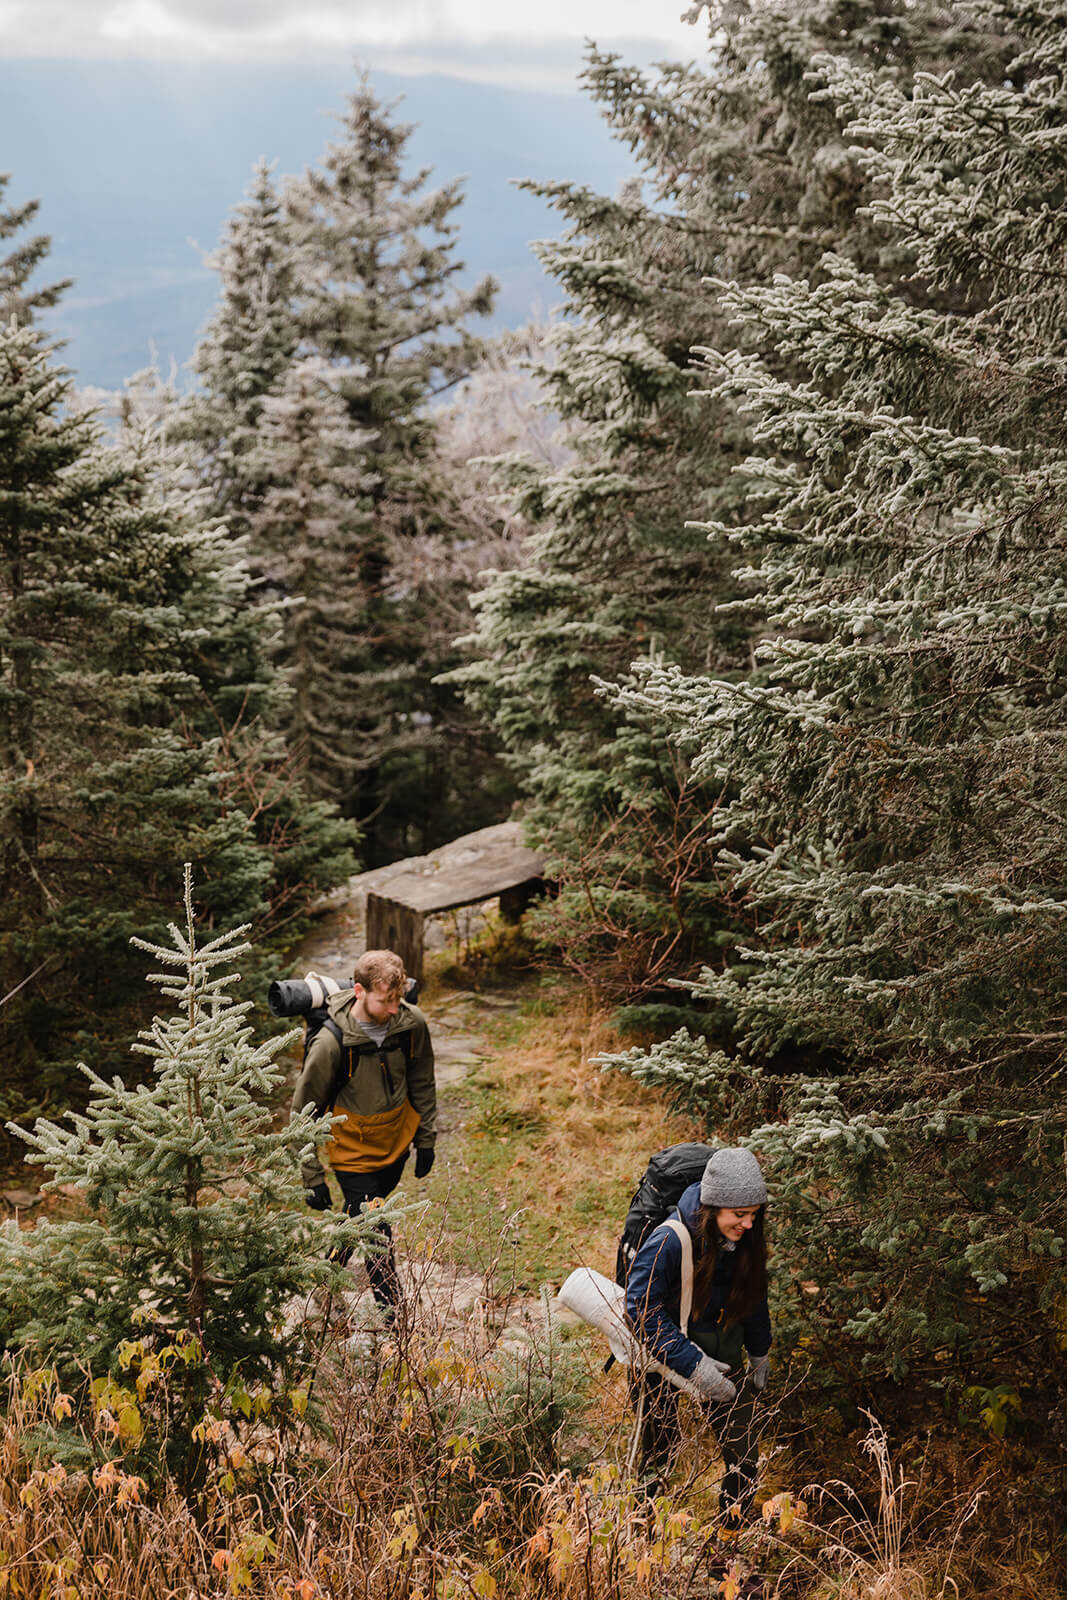  Eloping couple explores the trail during their adventure elopement on Mt. Mansfield, Vermont’s tallest mountain.  Vermont mountain wedding. Vermont winter elopement. Vermont elopement packages. 